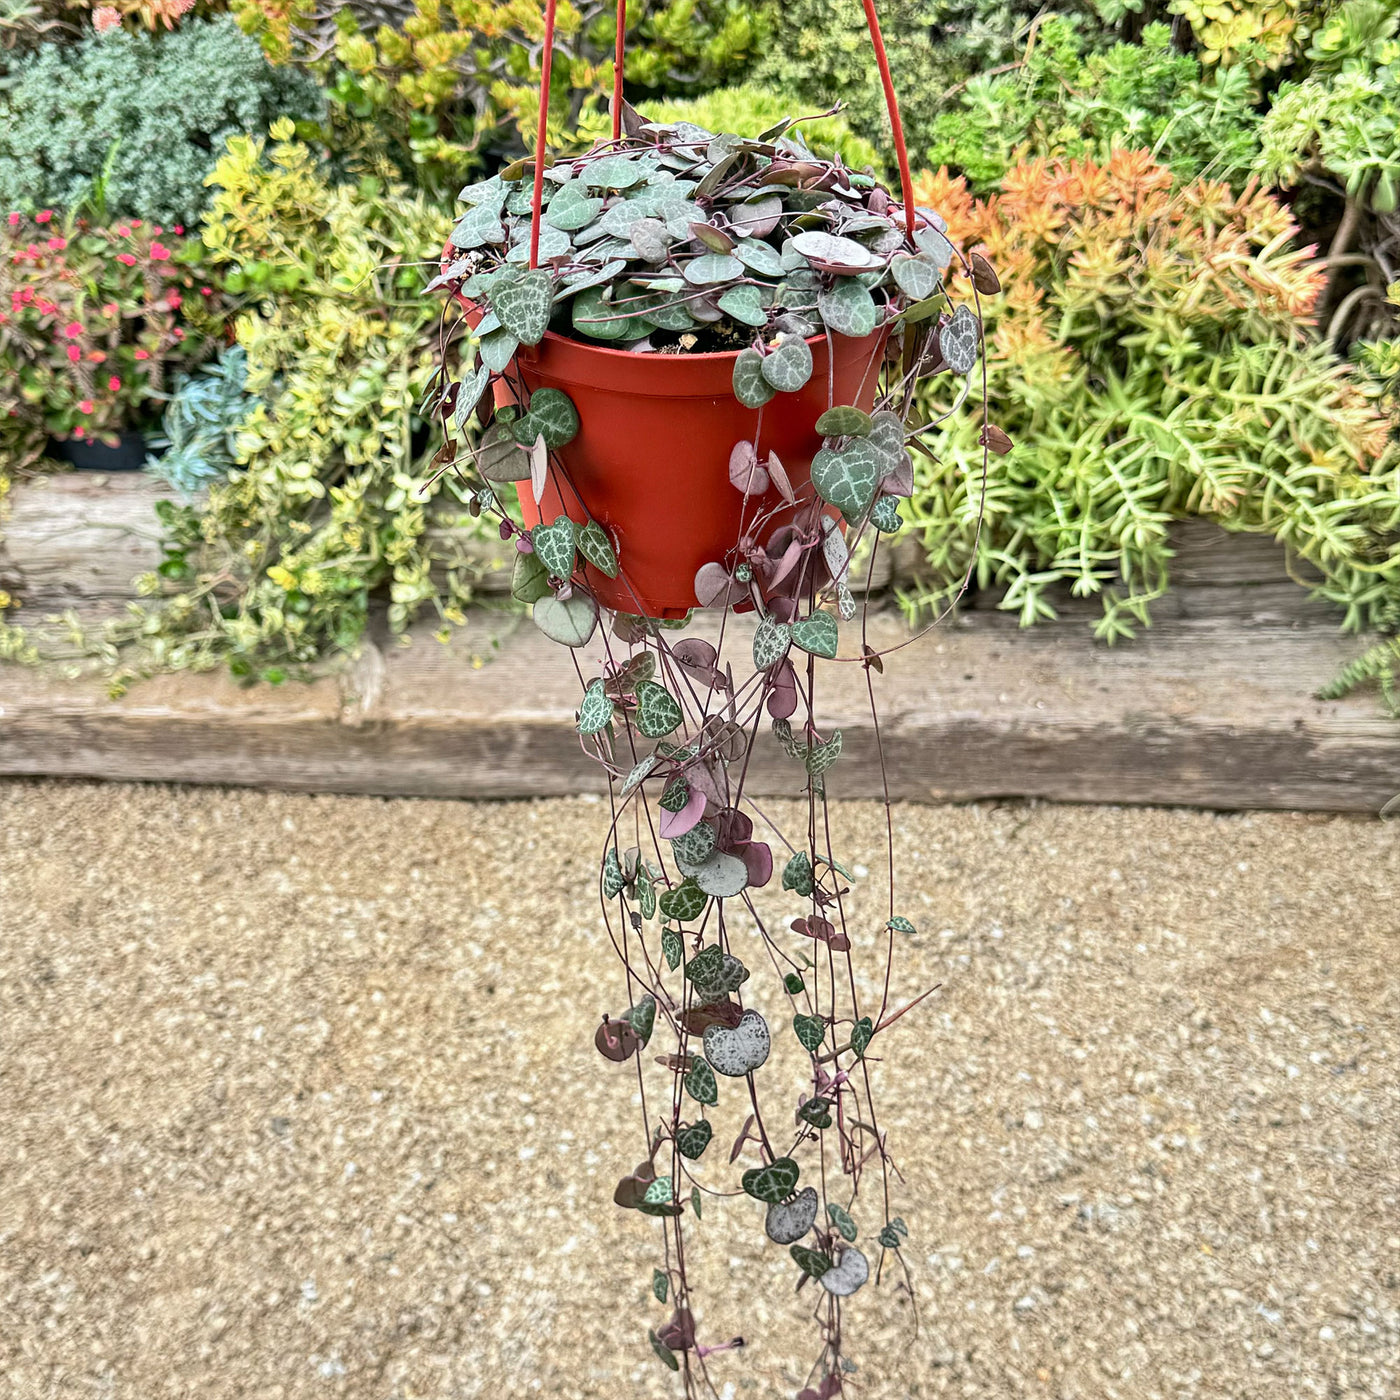 String of Hearts Plant – Ceropegia woodii